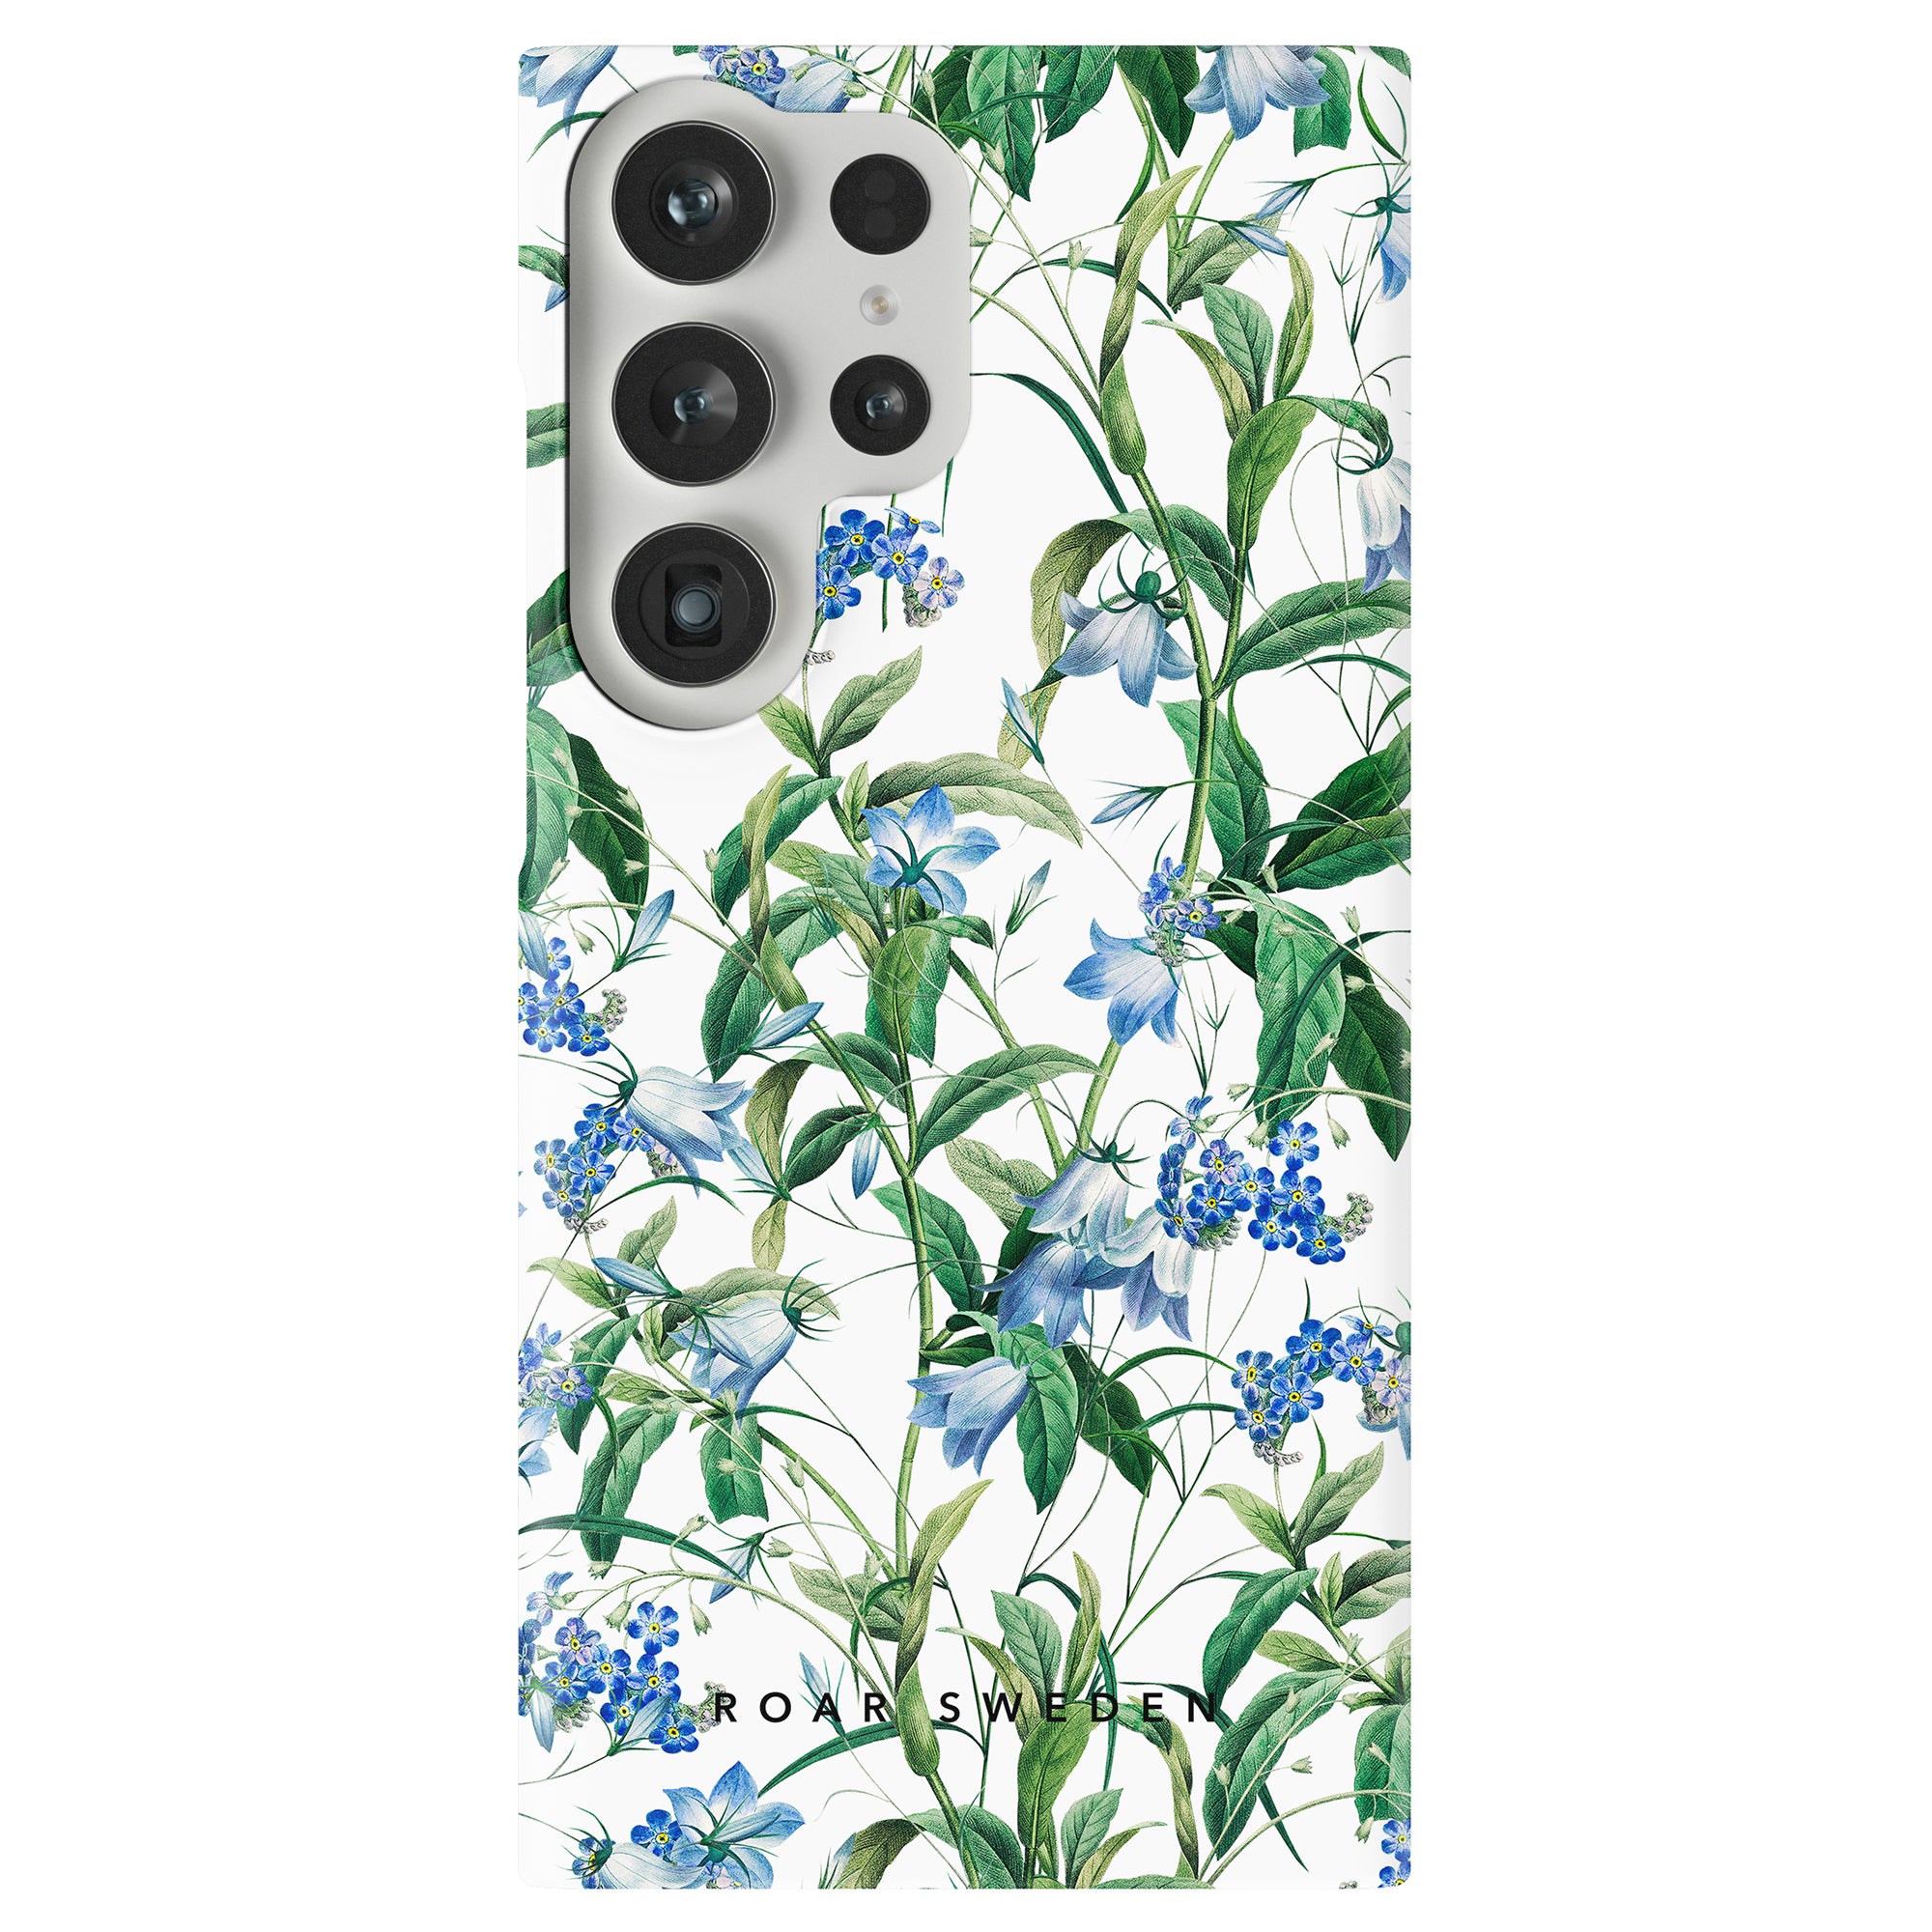 Smartphone with a Blue Bells - Slim case featuring blue flowers and natural green leaves, showcasing the camera cutout for three lenses.